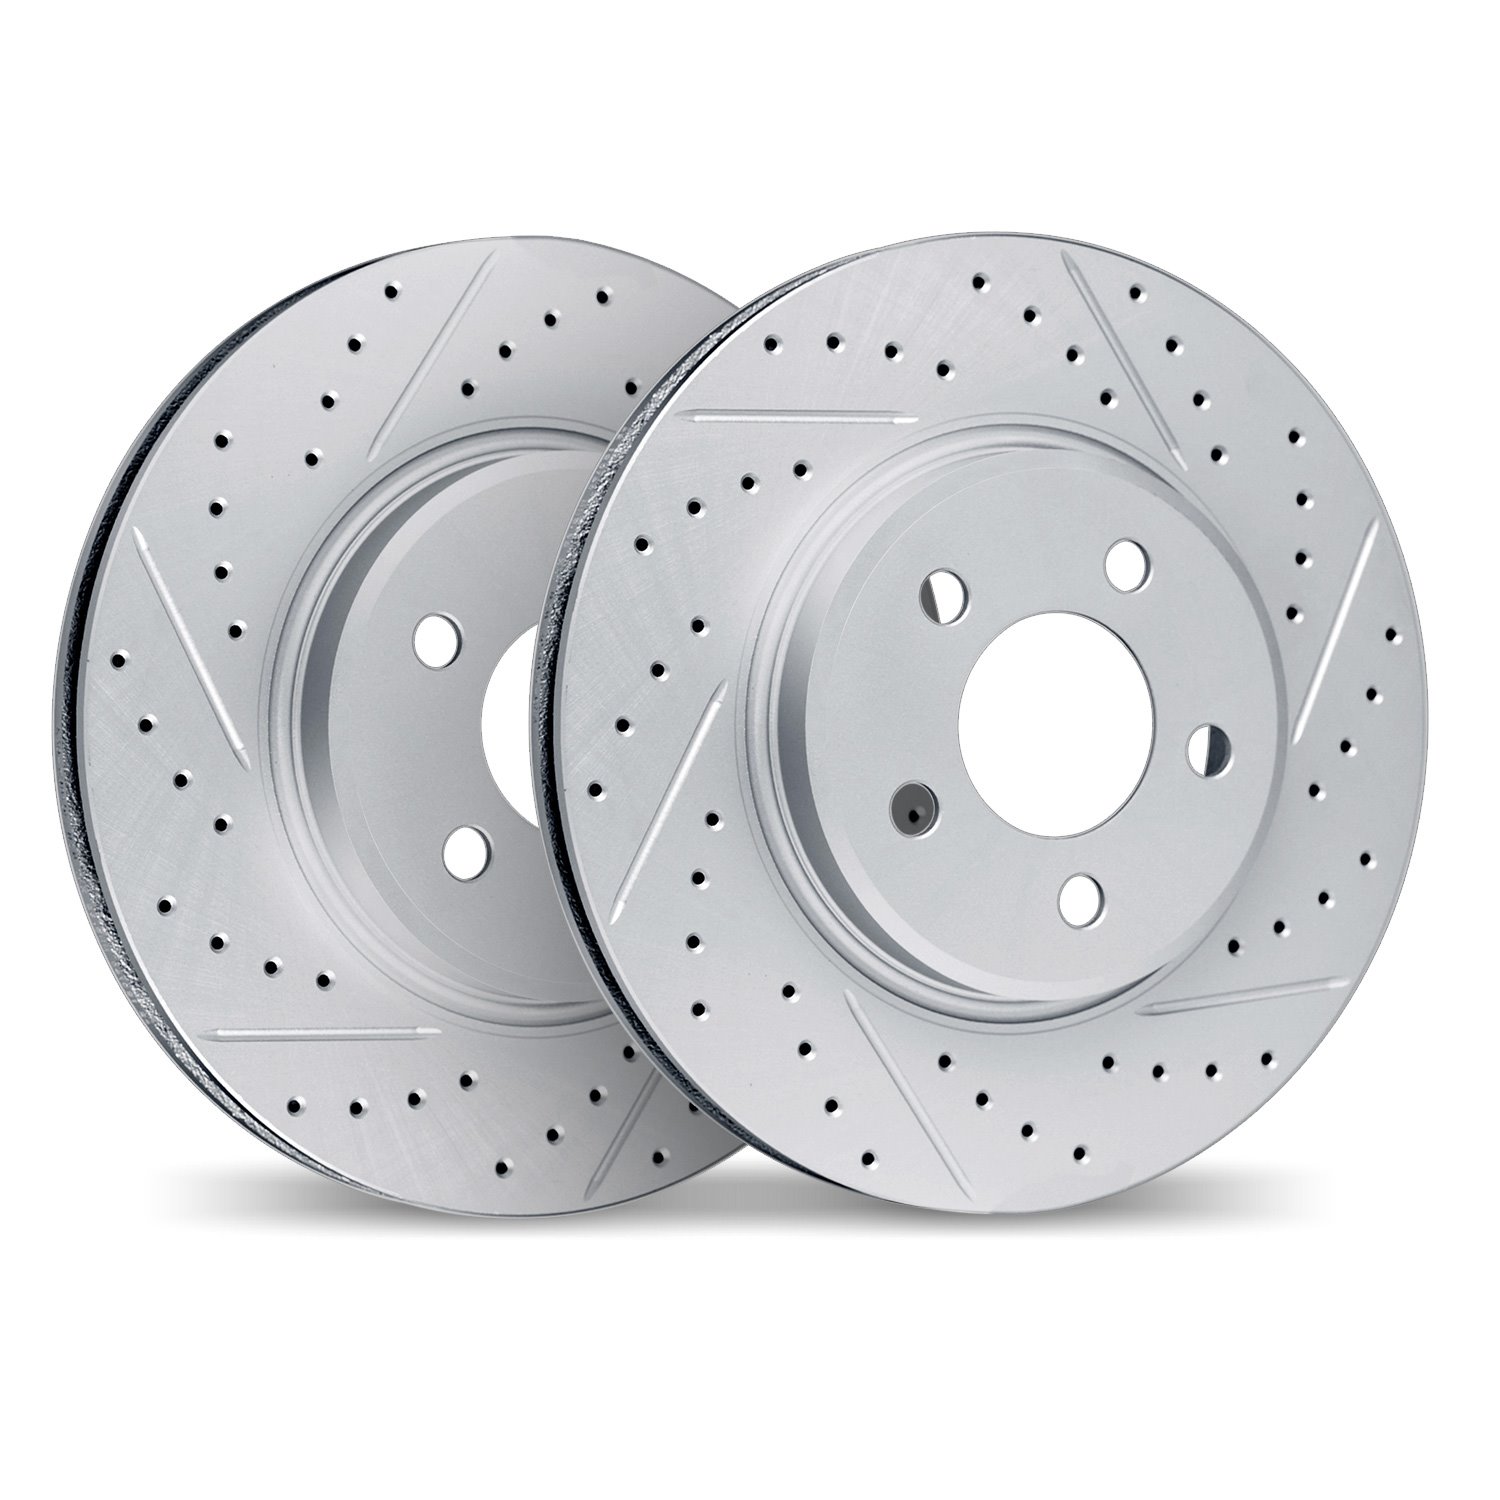 2002-80023 Geoperformance Drilled/Slotted Brake Rotors, 1995-2006 Ford/Lincoln/Mercury/Mazda, Position: Front